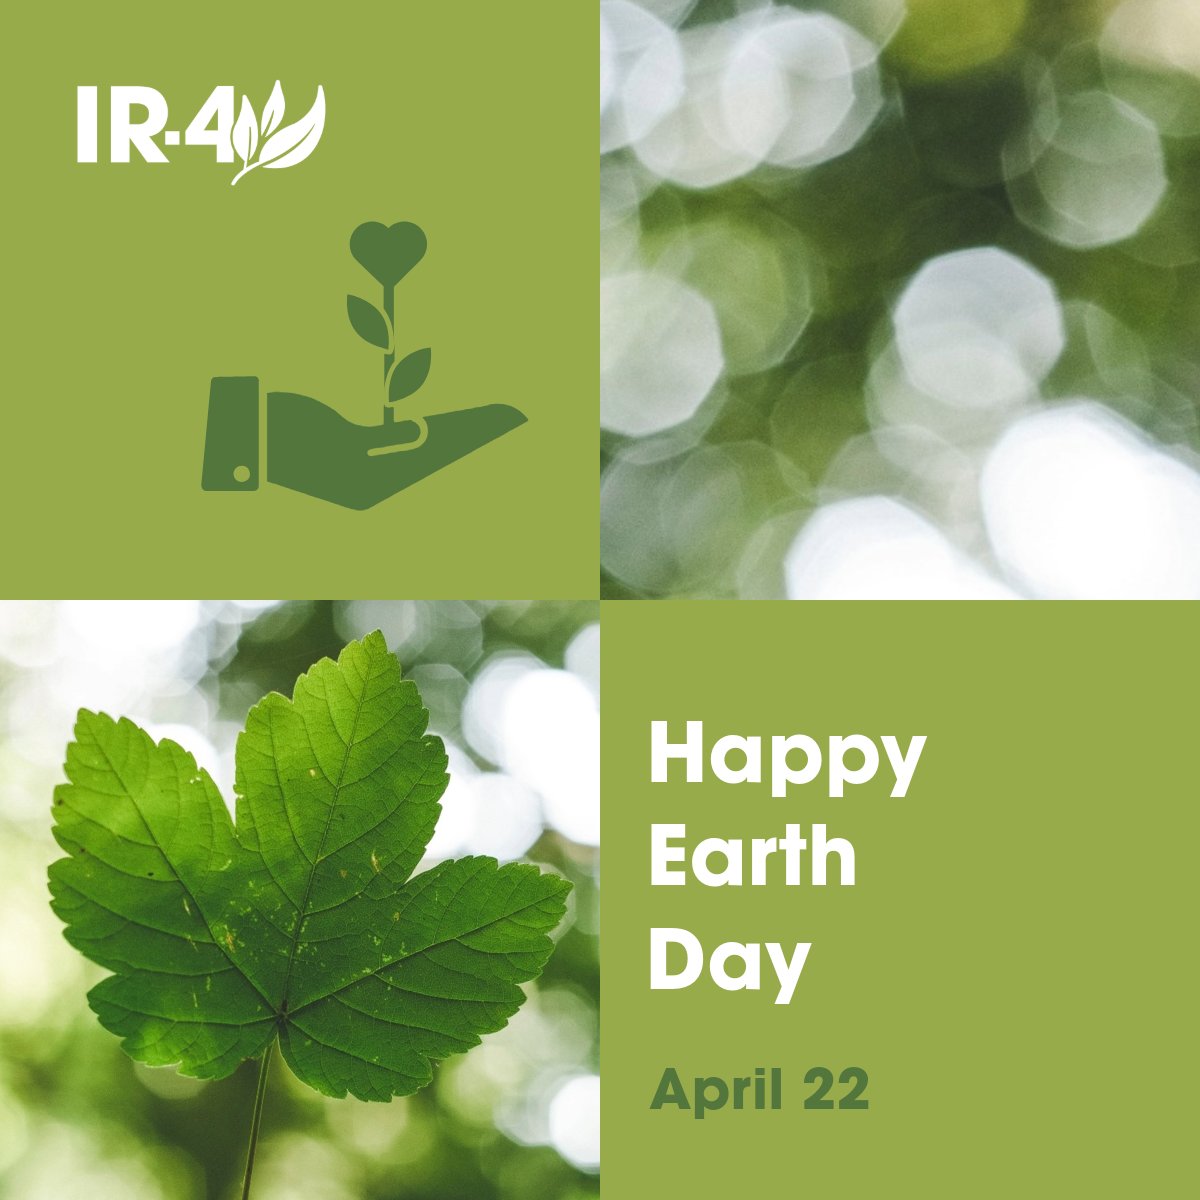 Happy #EarthDay from IR-4! We are committed to supporting specialty crop growers in the face of climate change + shifting pest pressures. While these challenges are tough, we believe in the innovative genius of the ag community. We can all help generate meaningful solutions!